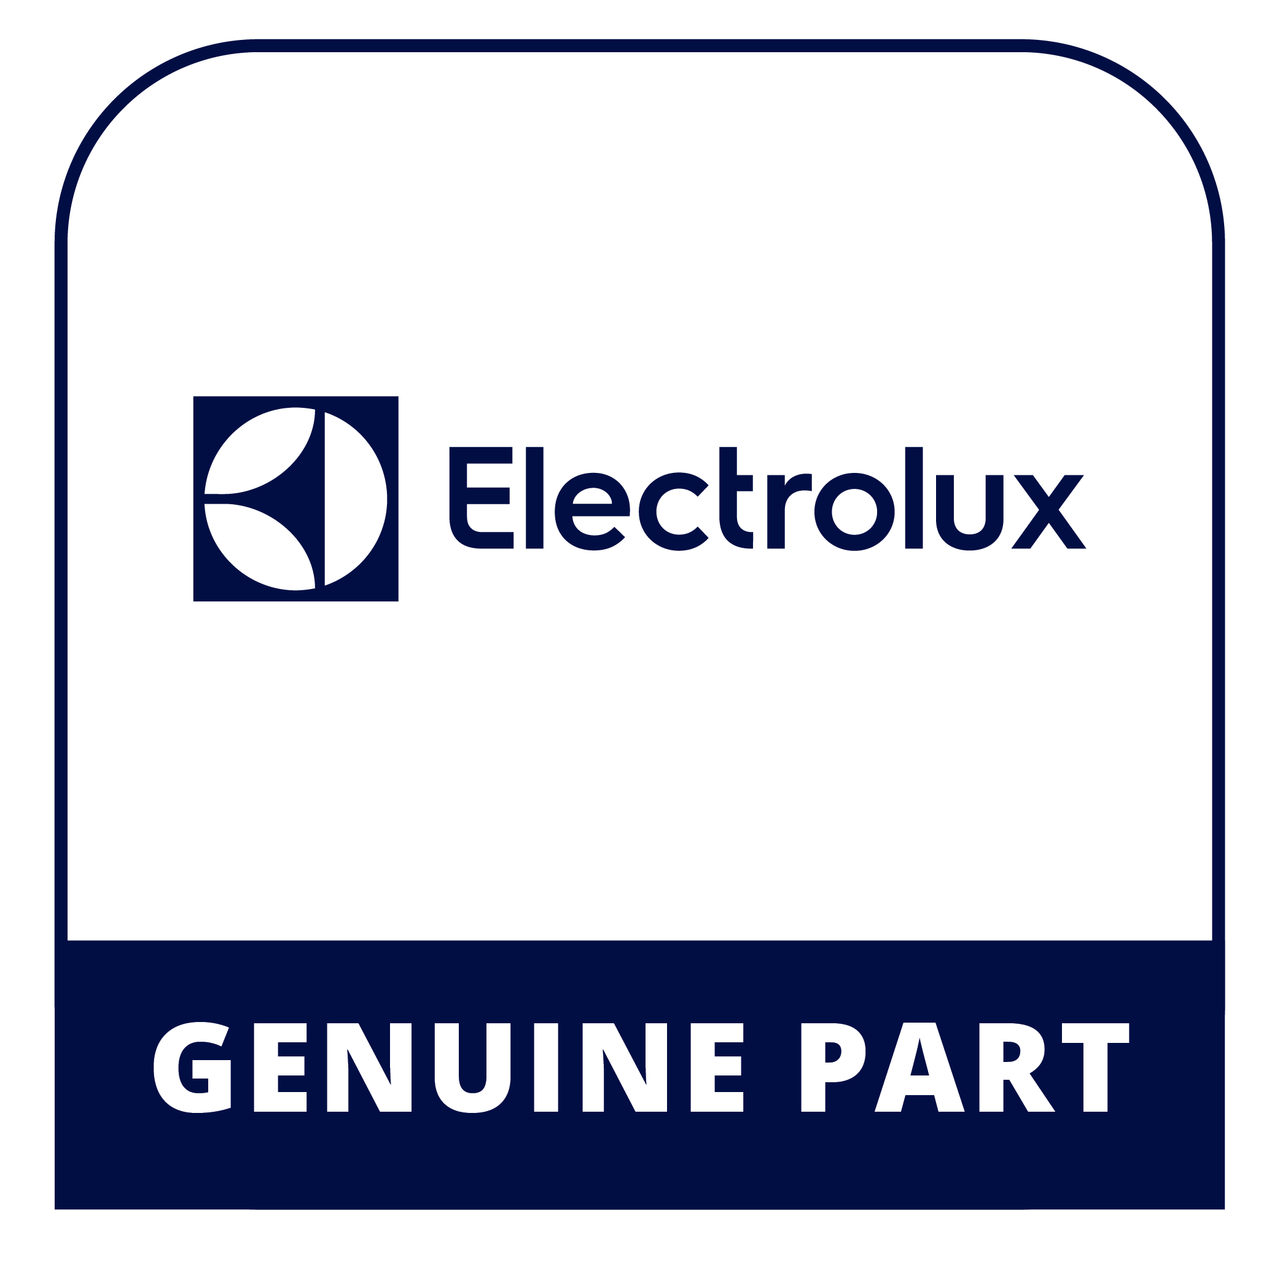 Frigidaire - Electrolux 316417297 Owners Manual - Genuine Electrolux Part